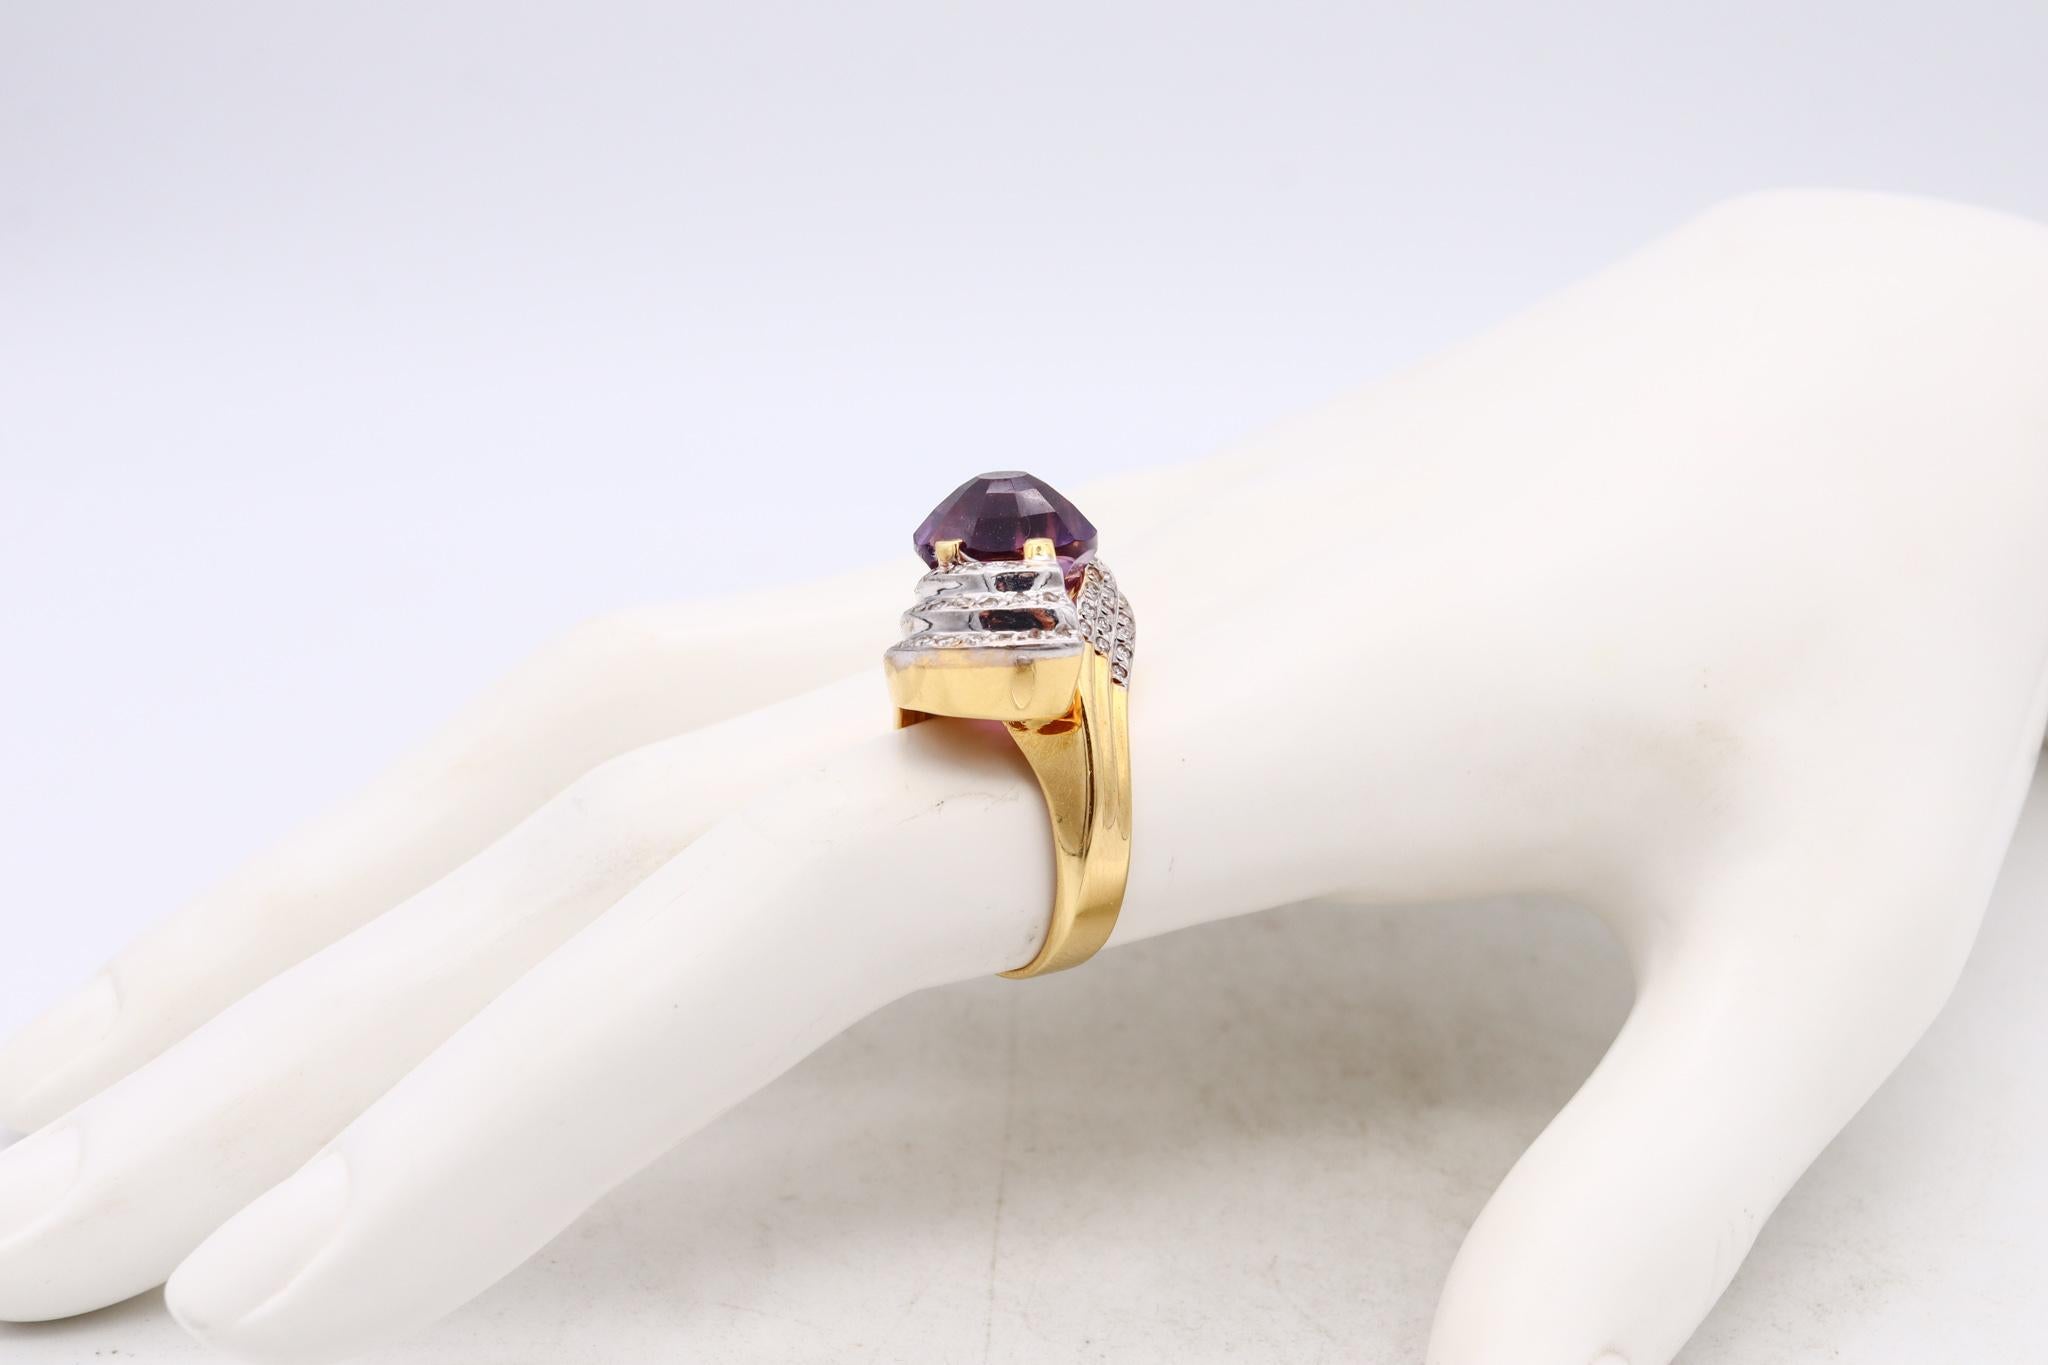 Brilliant Cut Modernist Italian Bypass Cocktail Ring 18k Gold 7.31ctw Amethyst and Diamonds